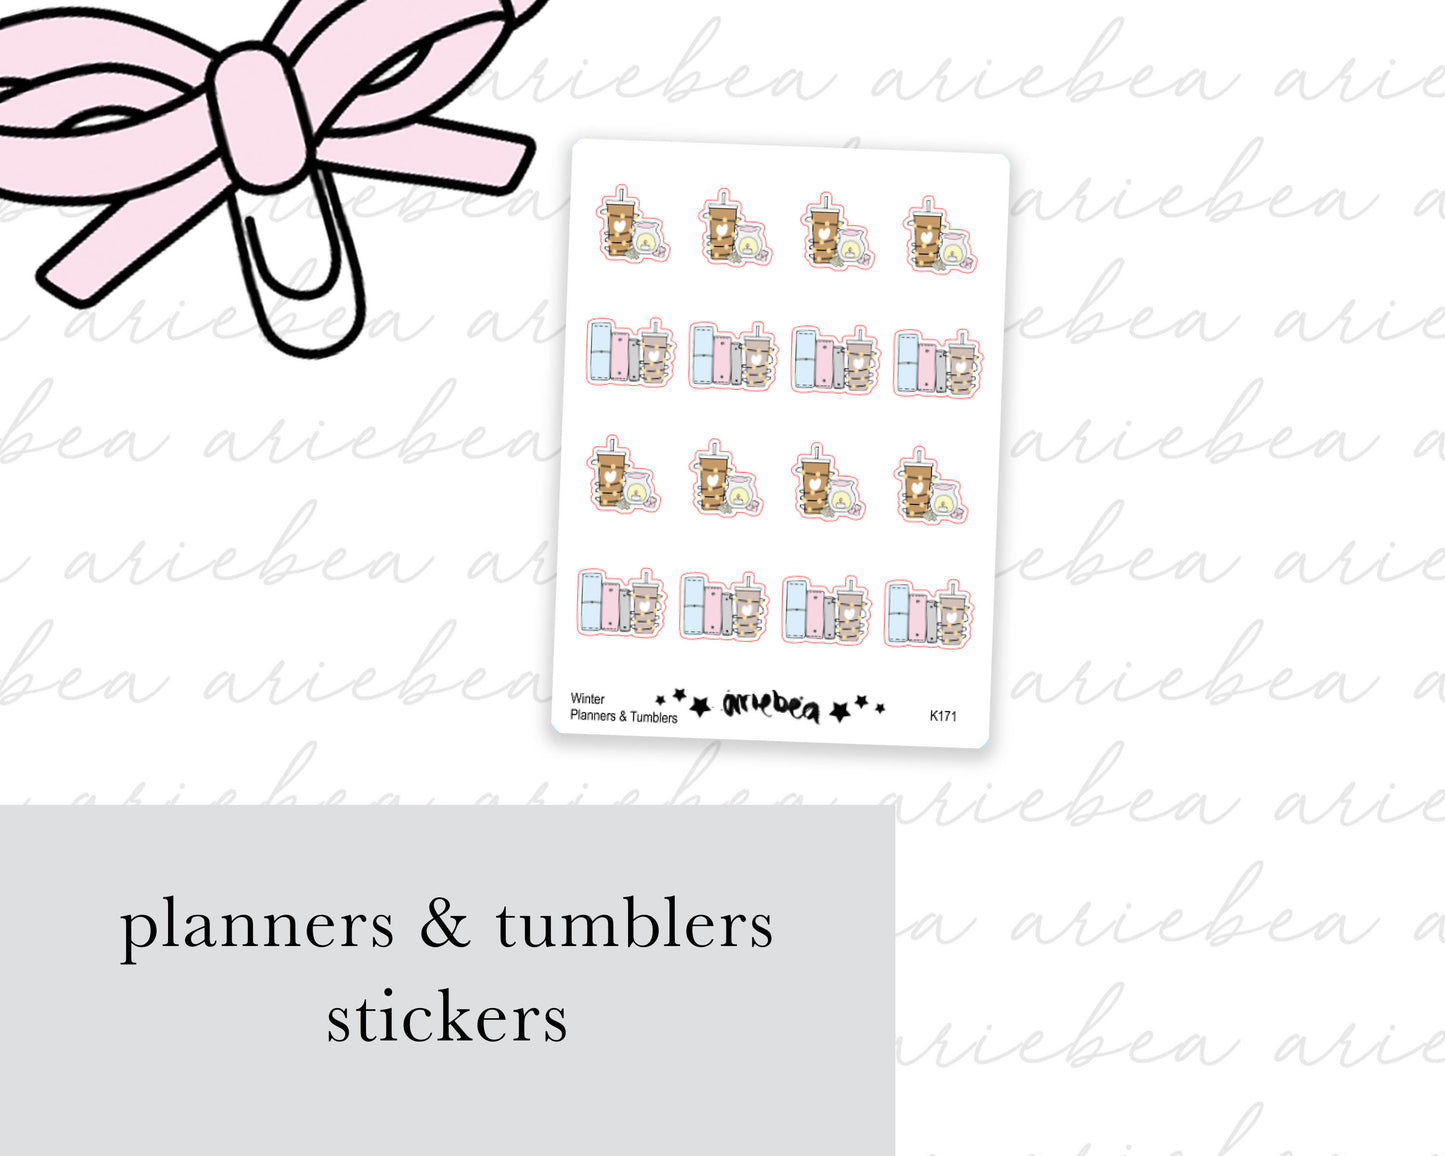 Winter Planner and Tumblers Stickers